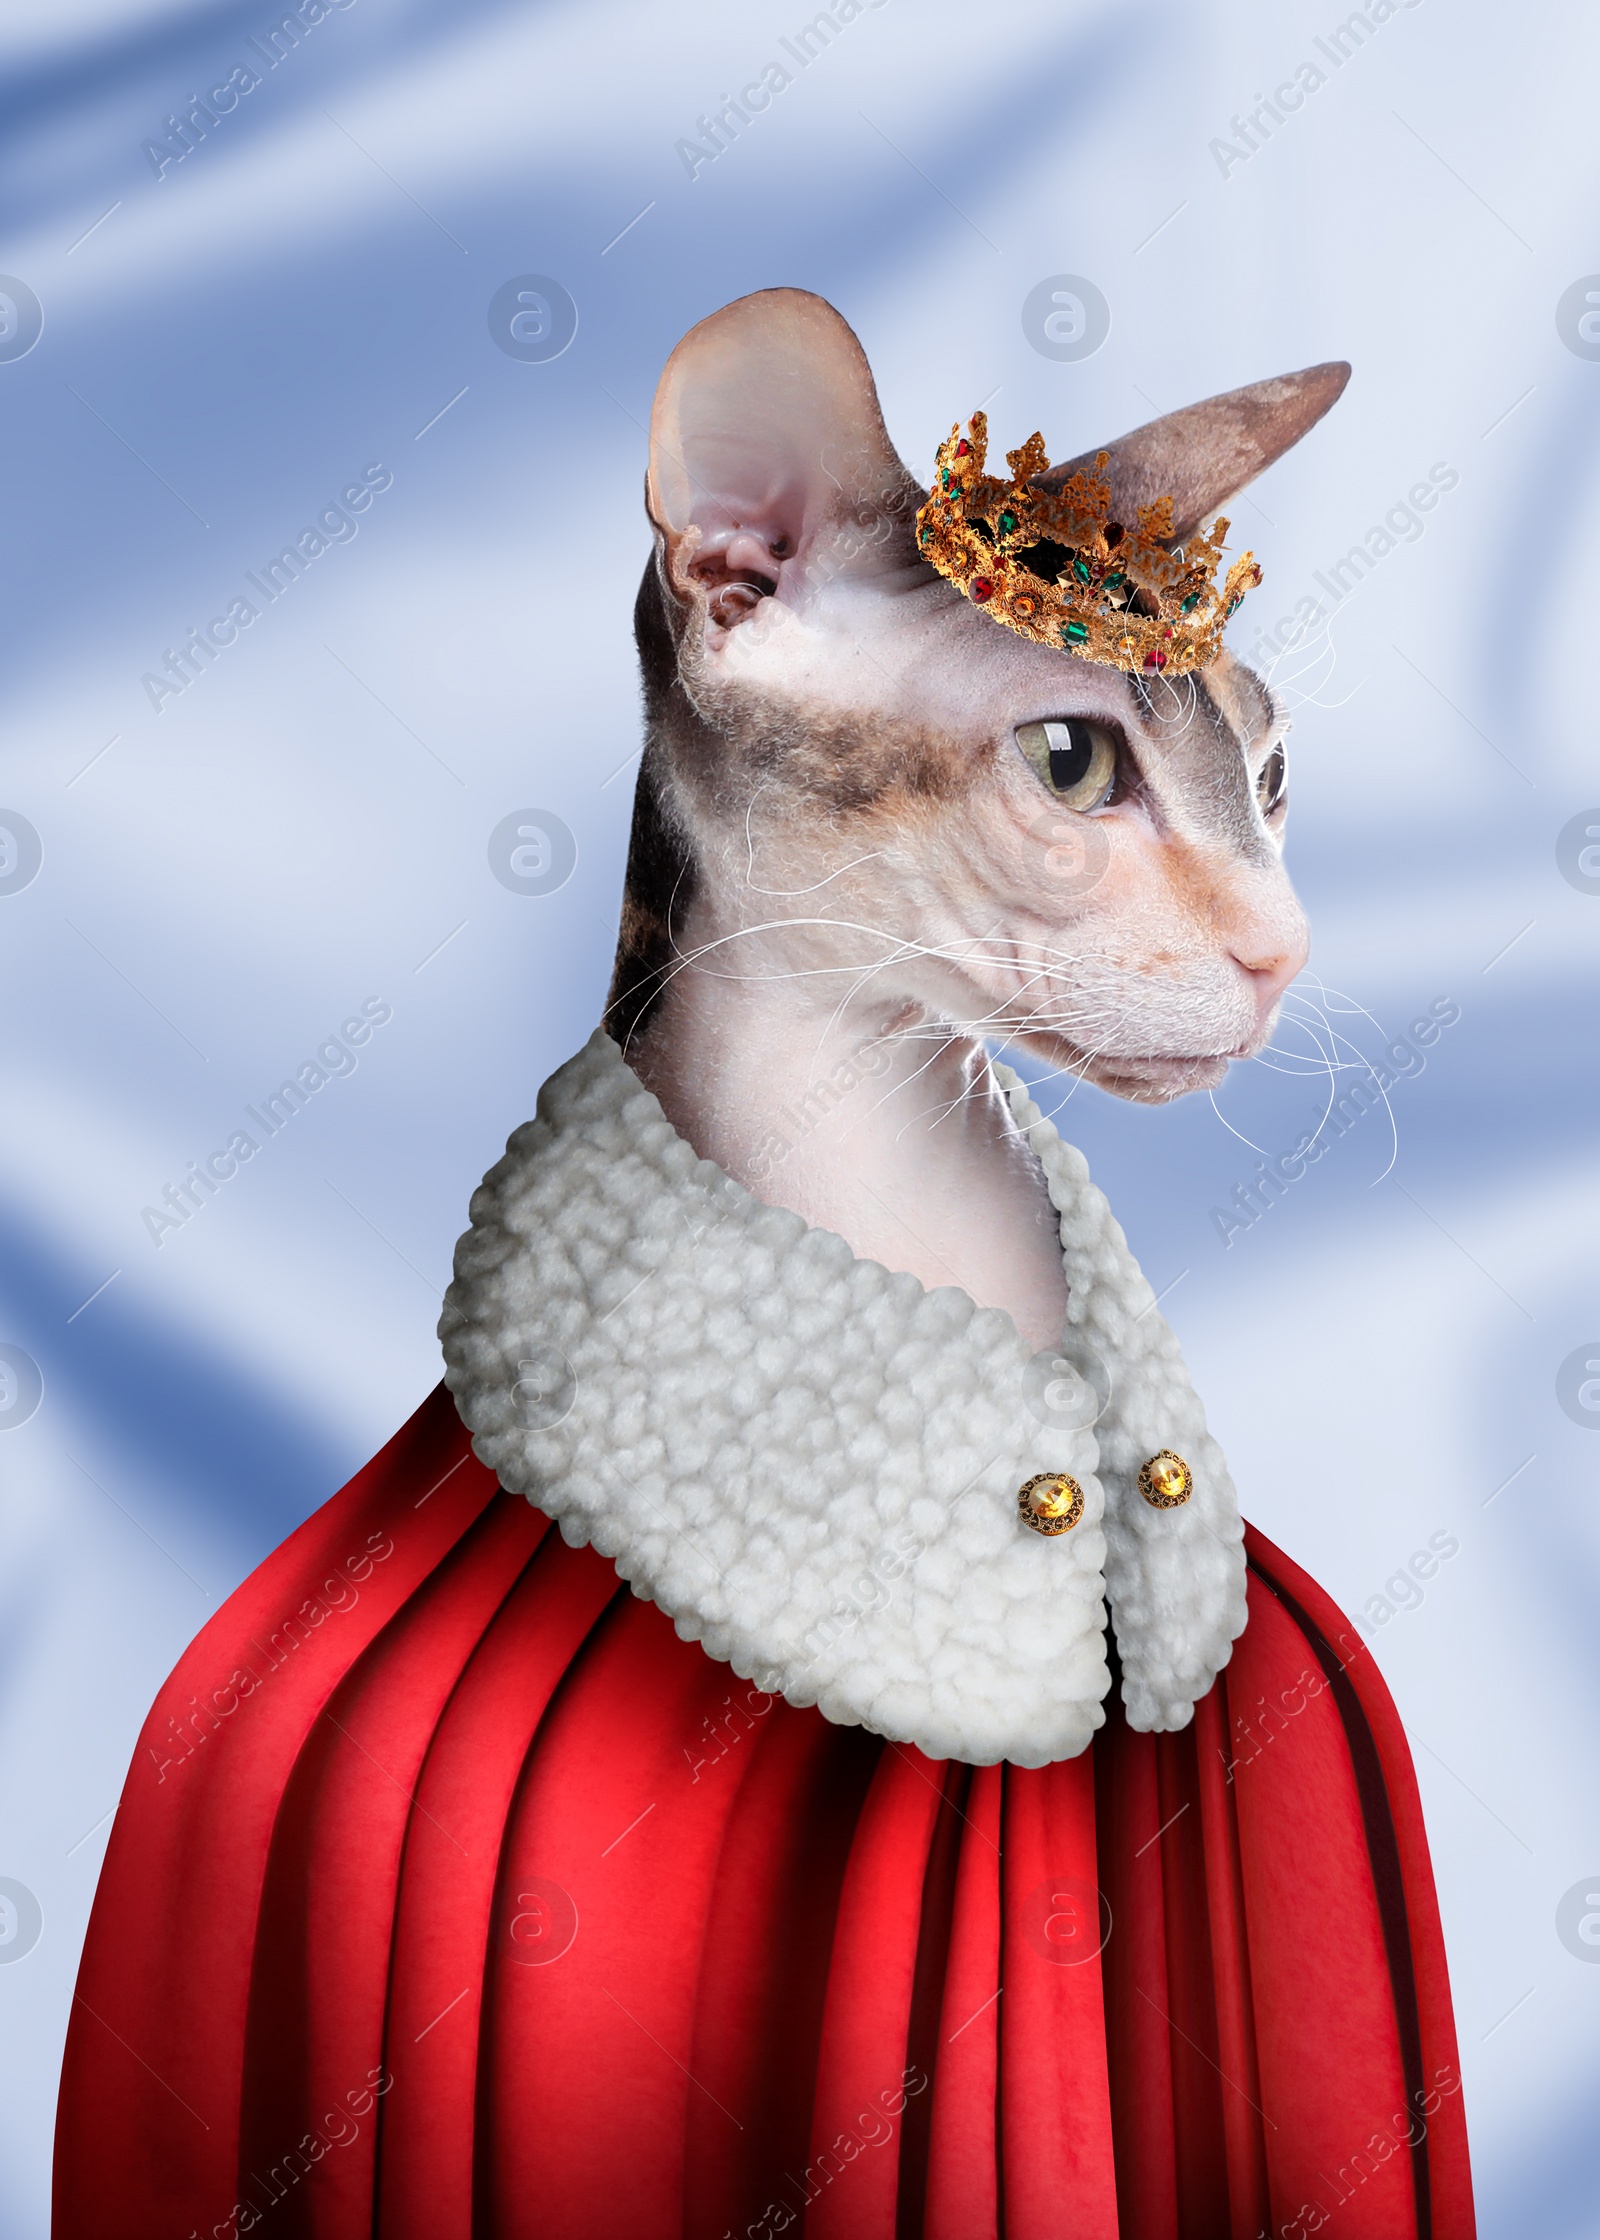 Image of  Sphynx cat dressed like royal person against light blue background